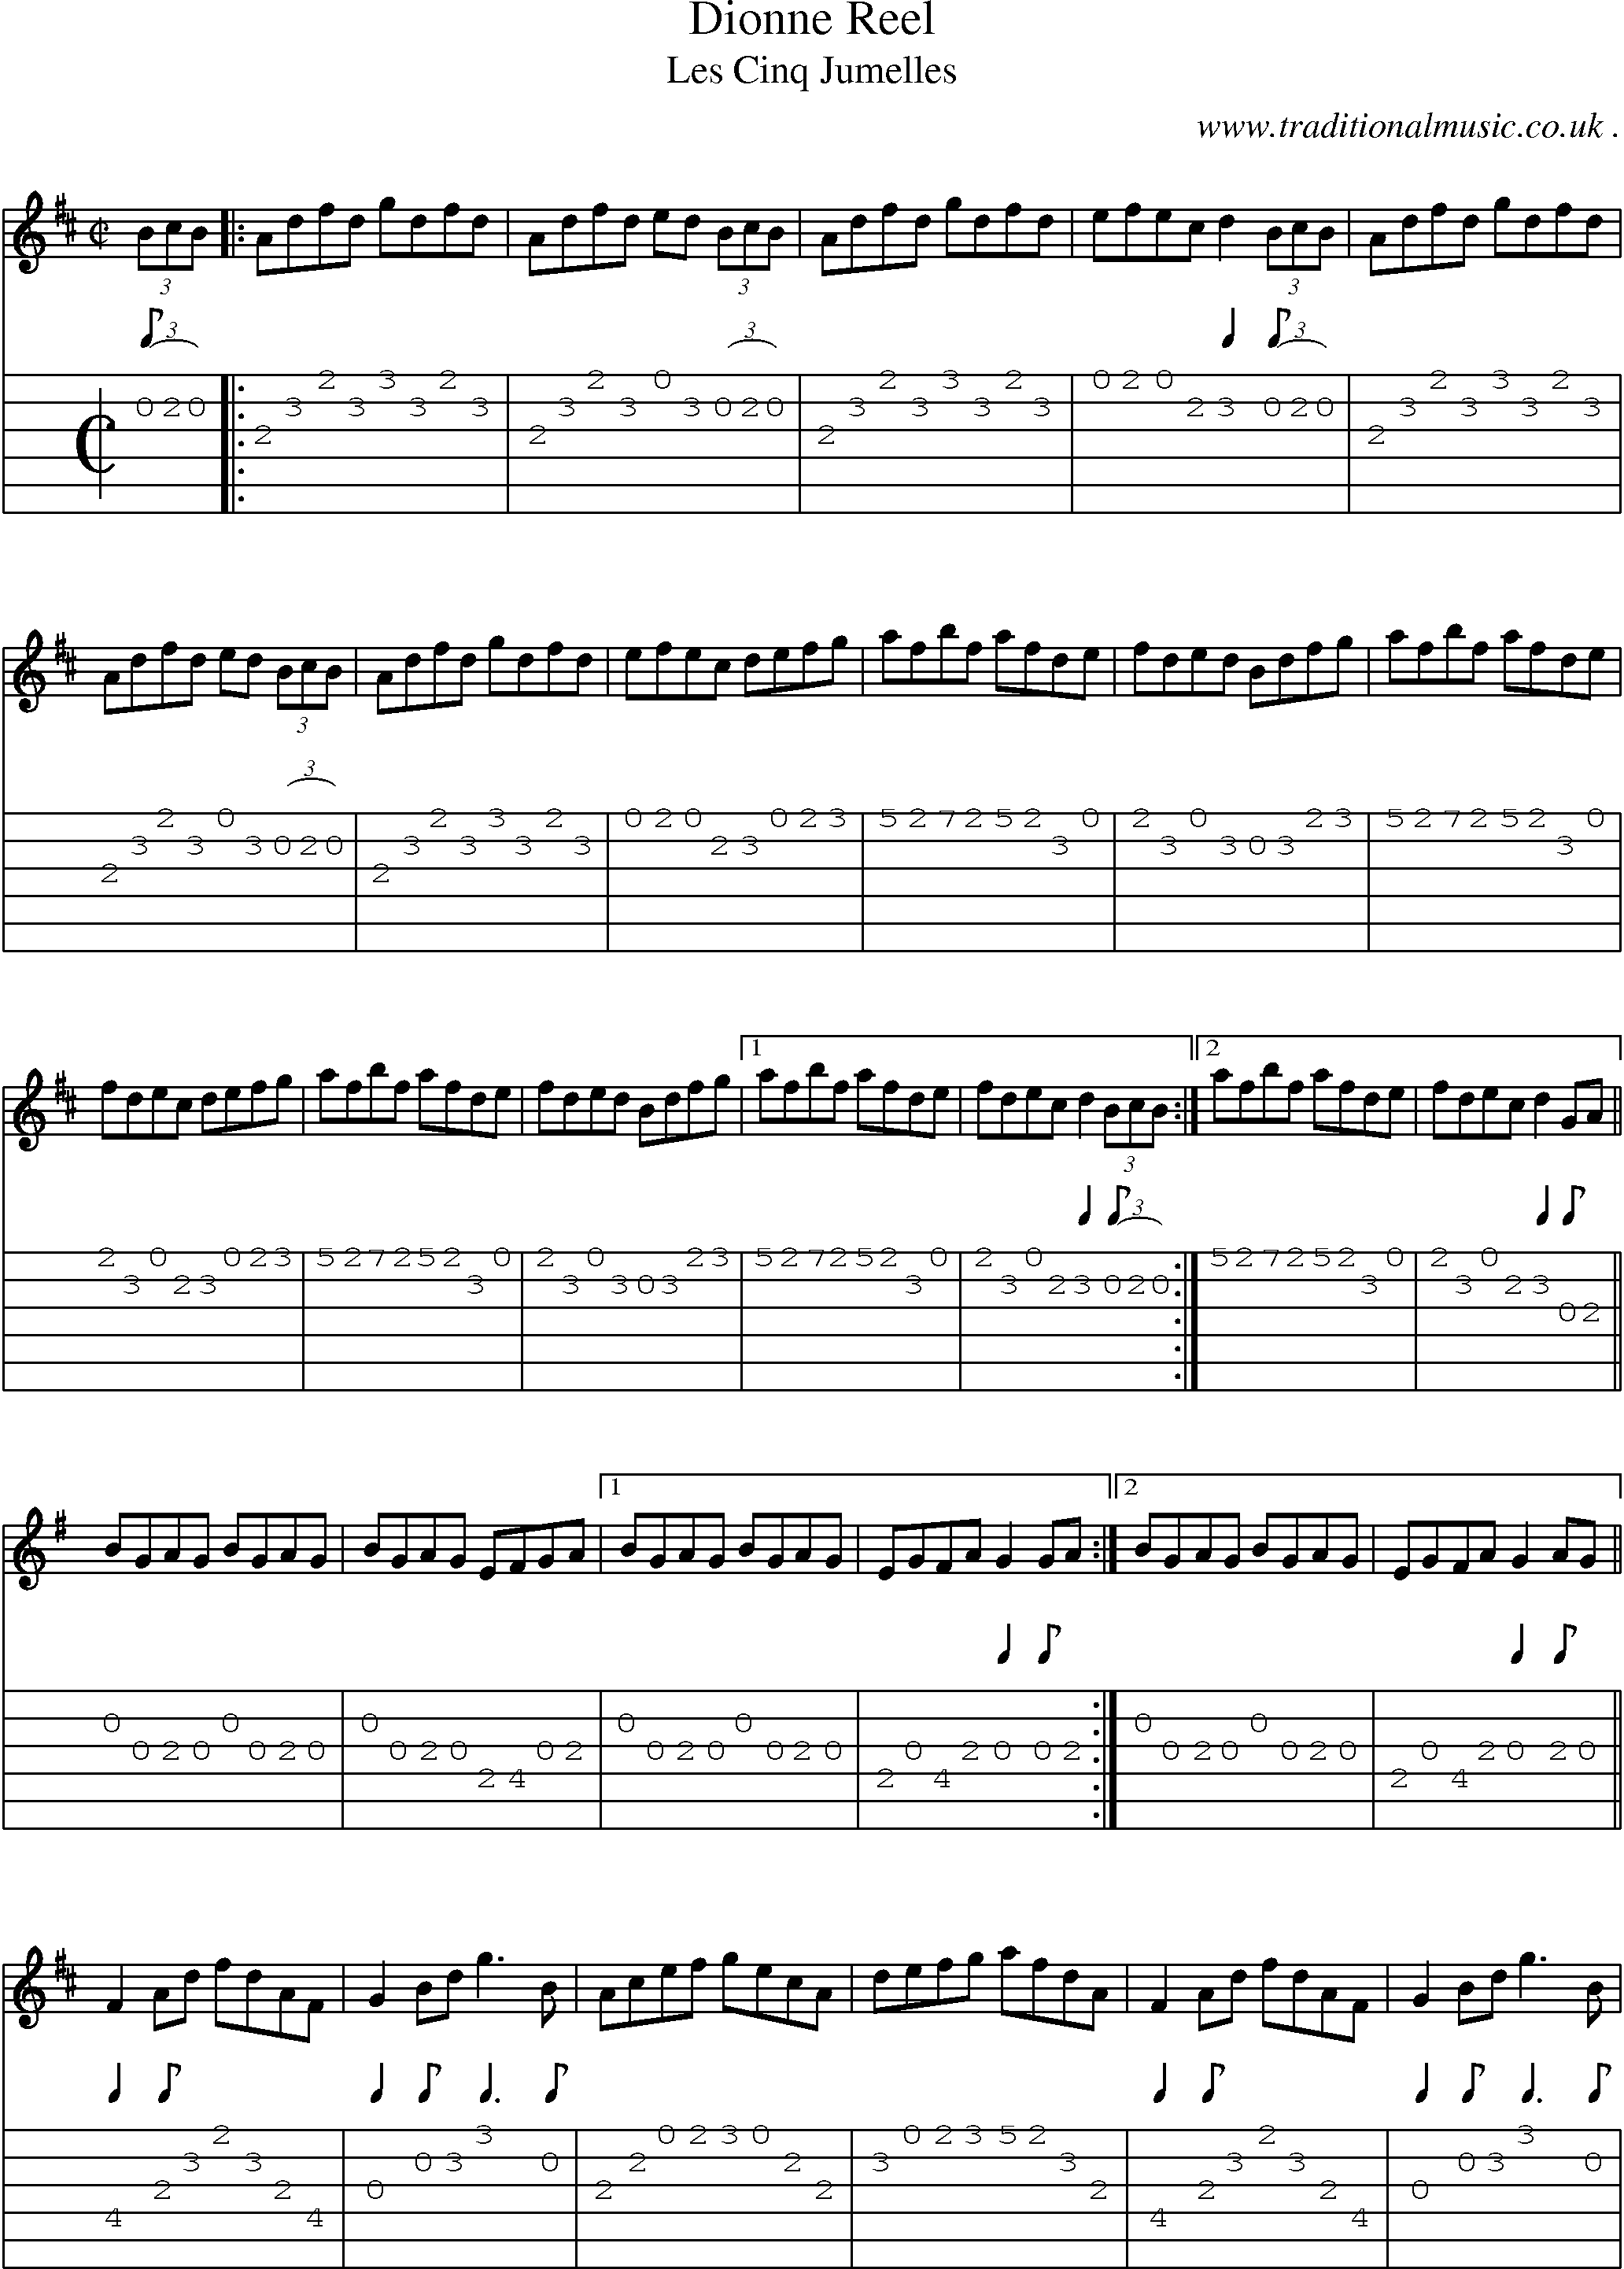 Music Score and Guitar Tabs for Dionne Reel